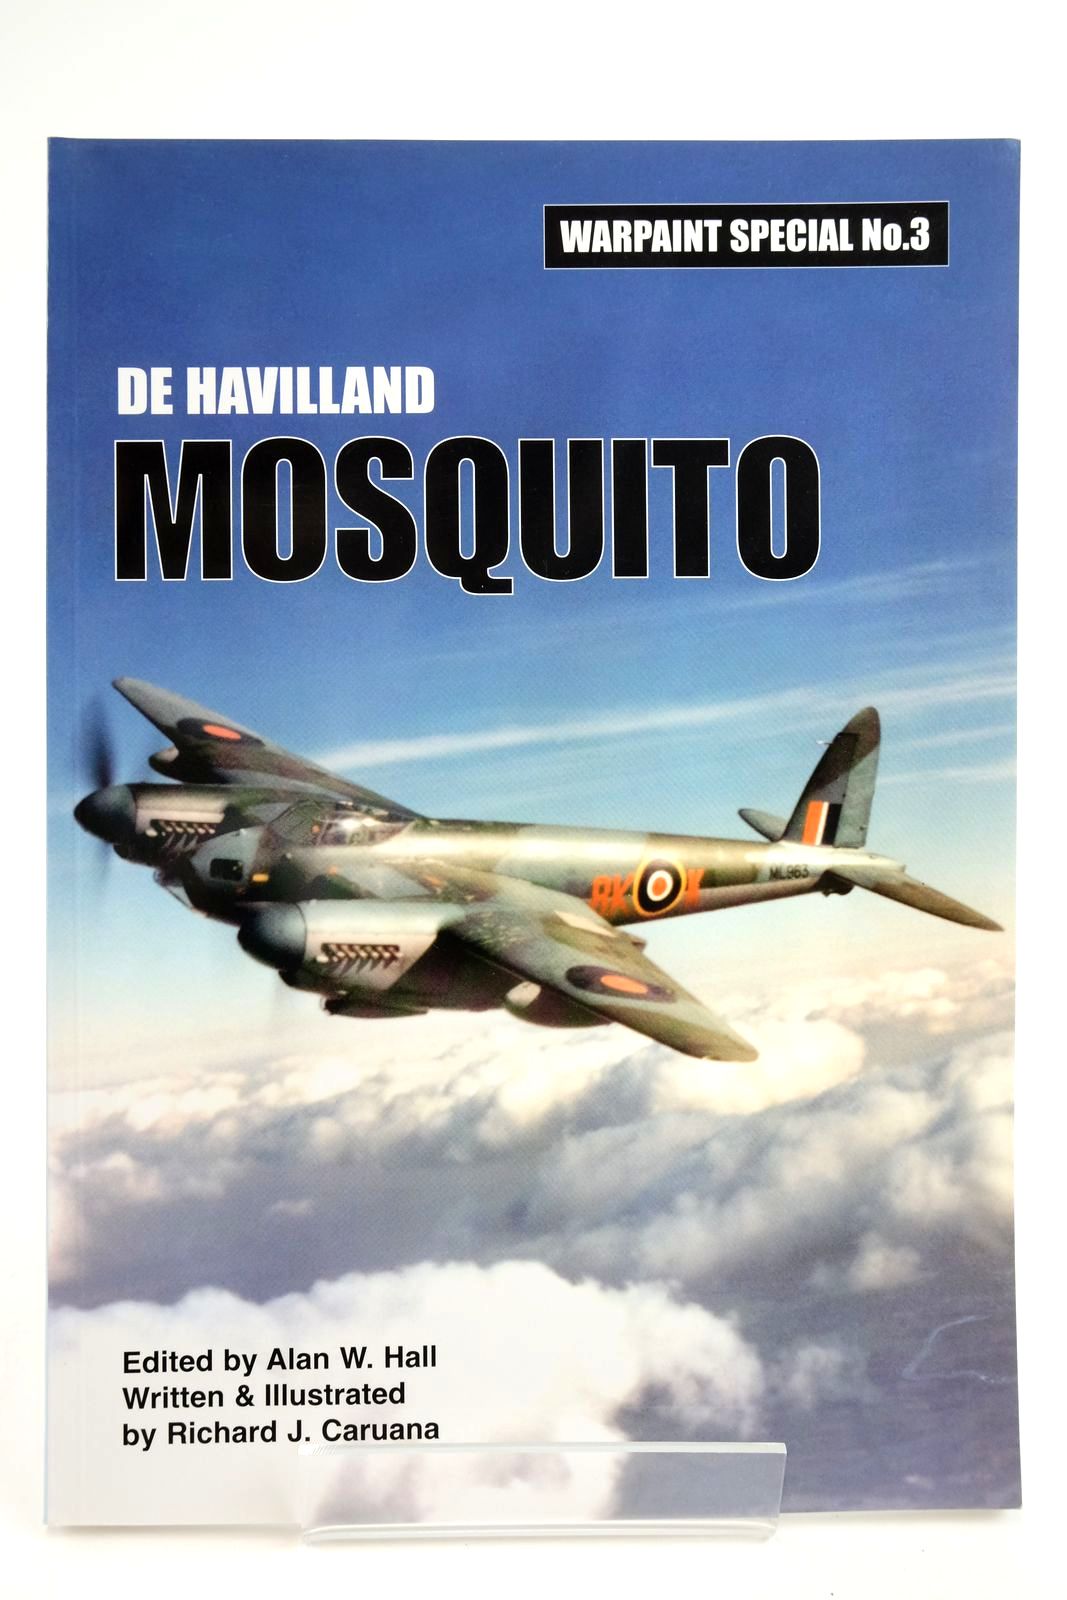 Photo of DE HAVILLAND MOSQUITO written by Hall, Alan W. Caruana, Richard J. illustrated by Caruana, Richard J. published by Warpaint Books Ltd. (STOCK CODE: 2135113)  for sale by Stella & Rose's Books